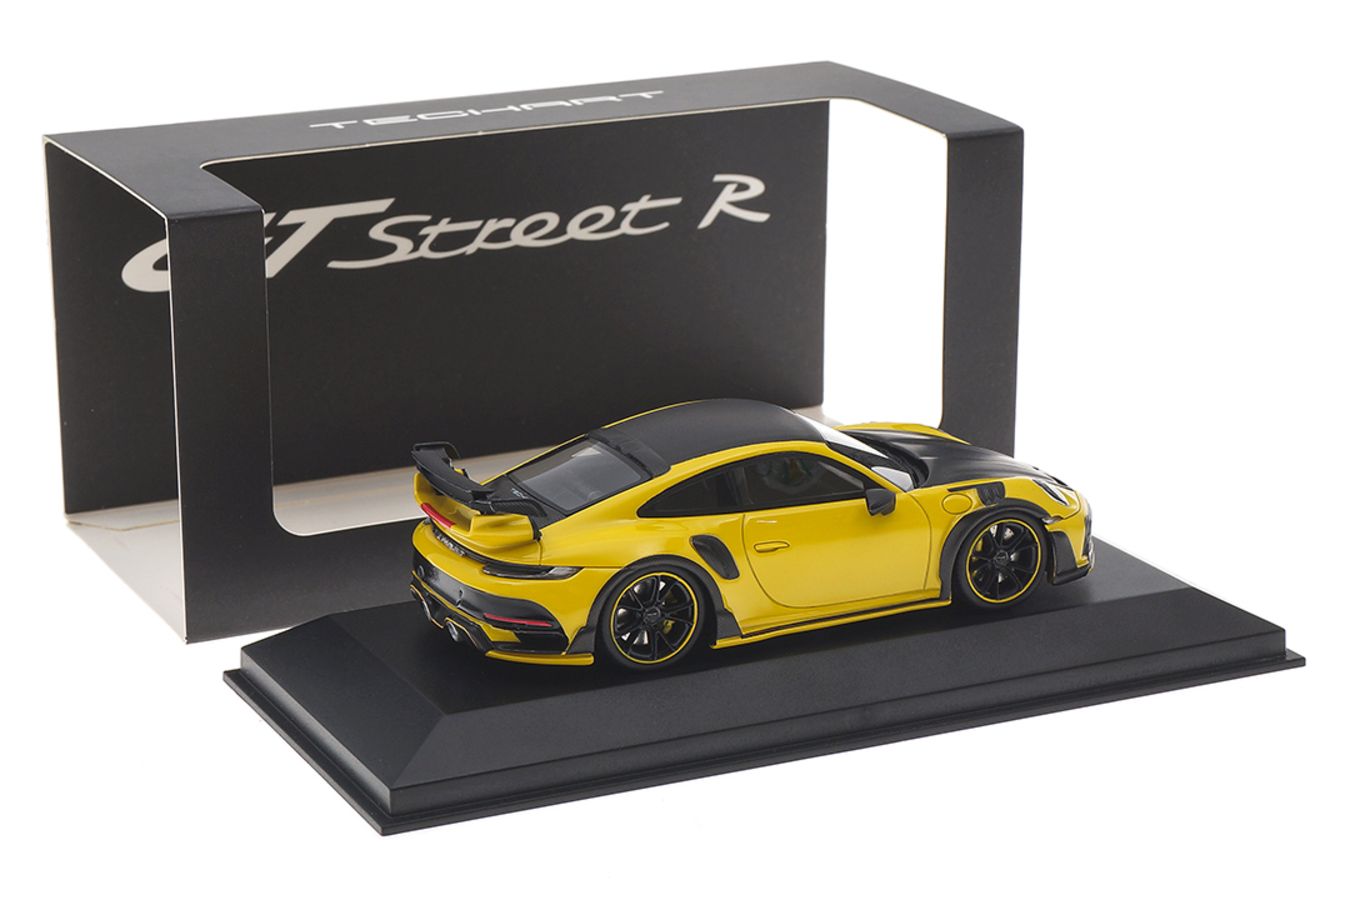 Collectors Models in 1/18 Scale